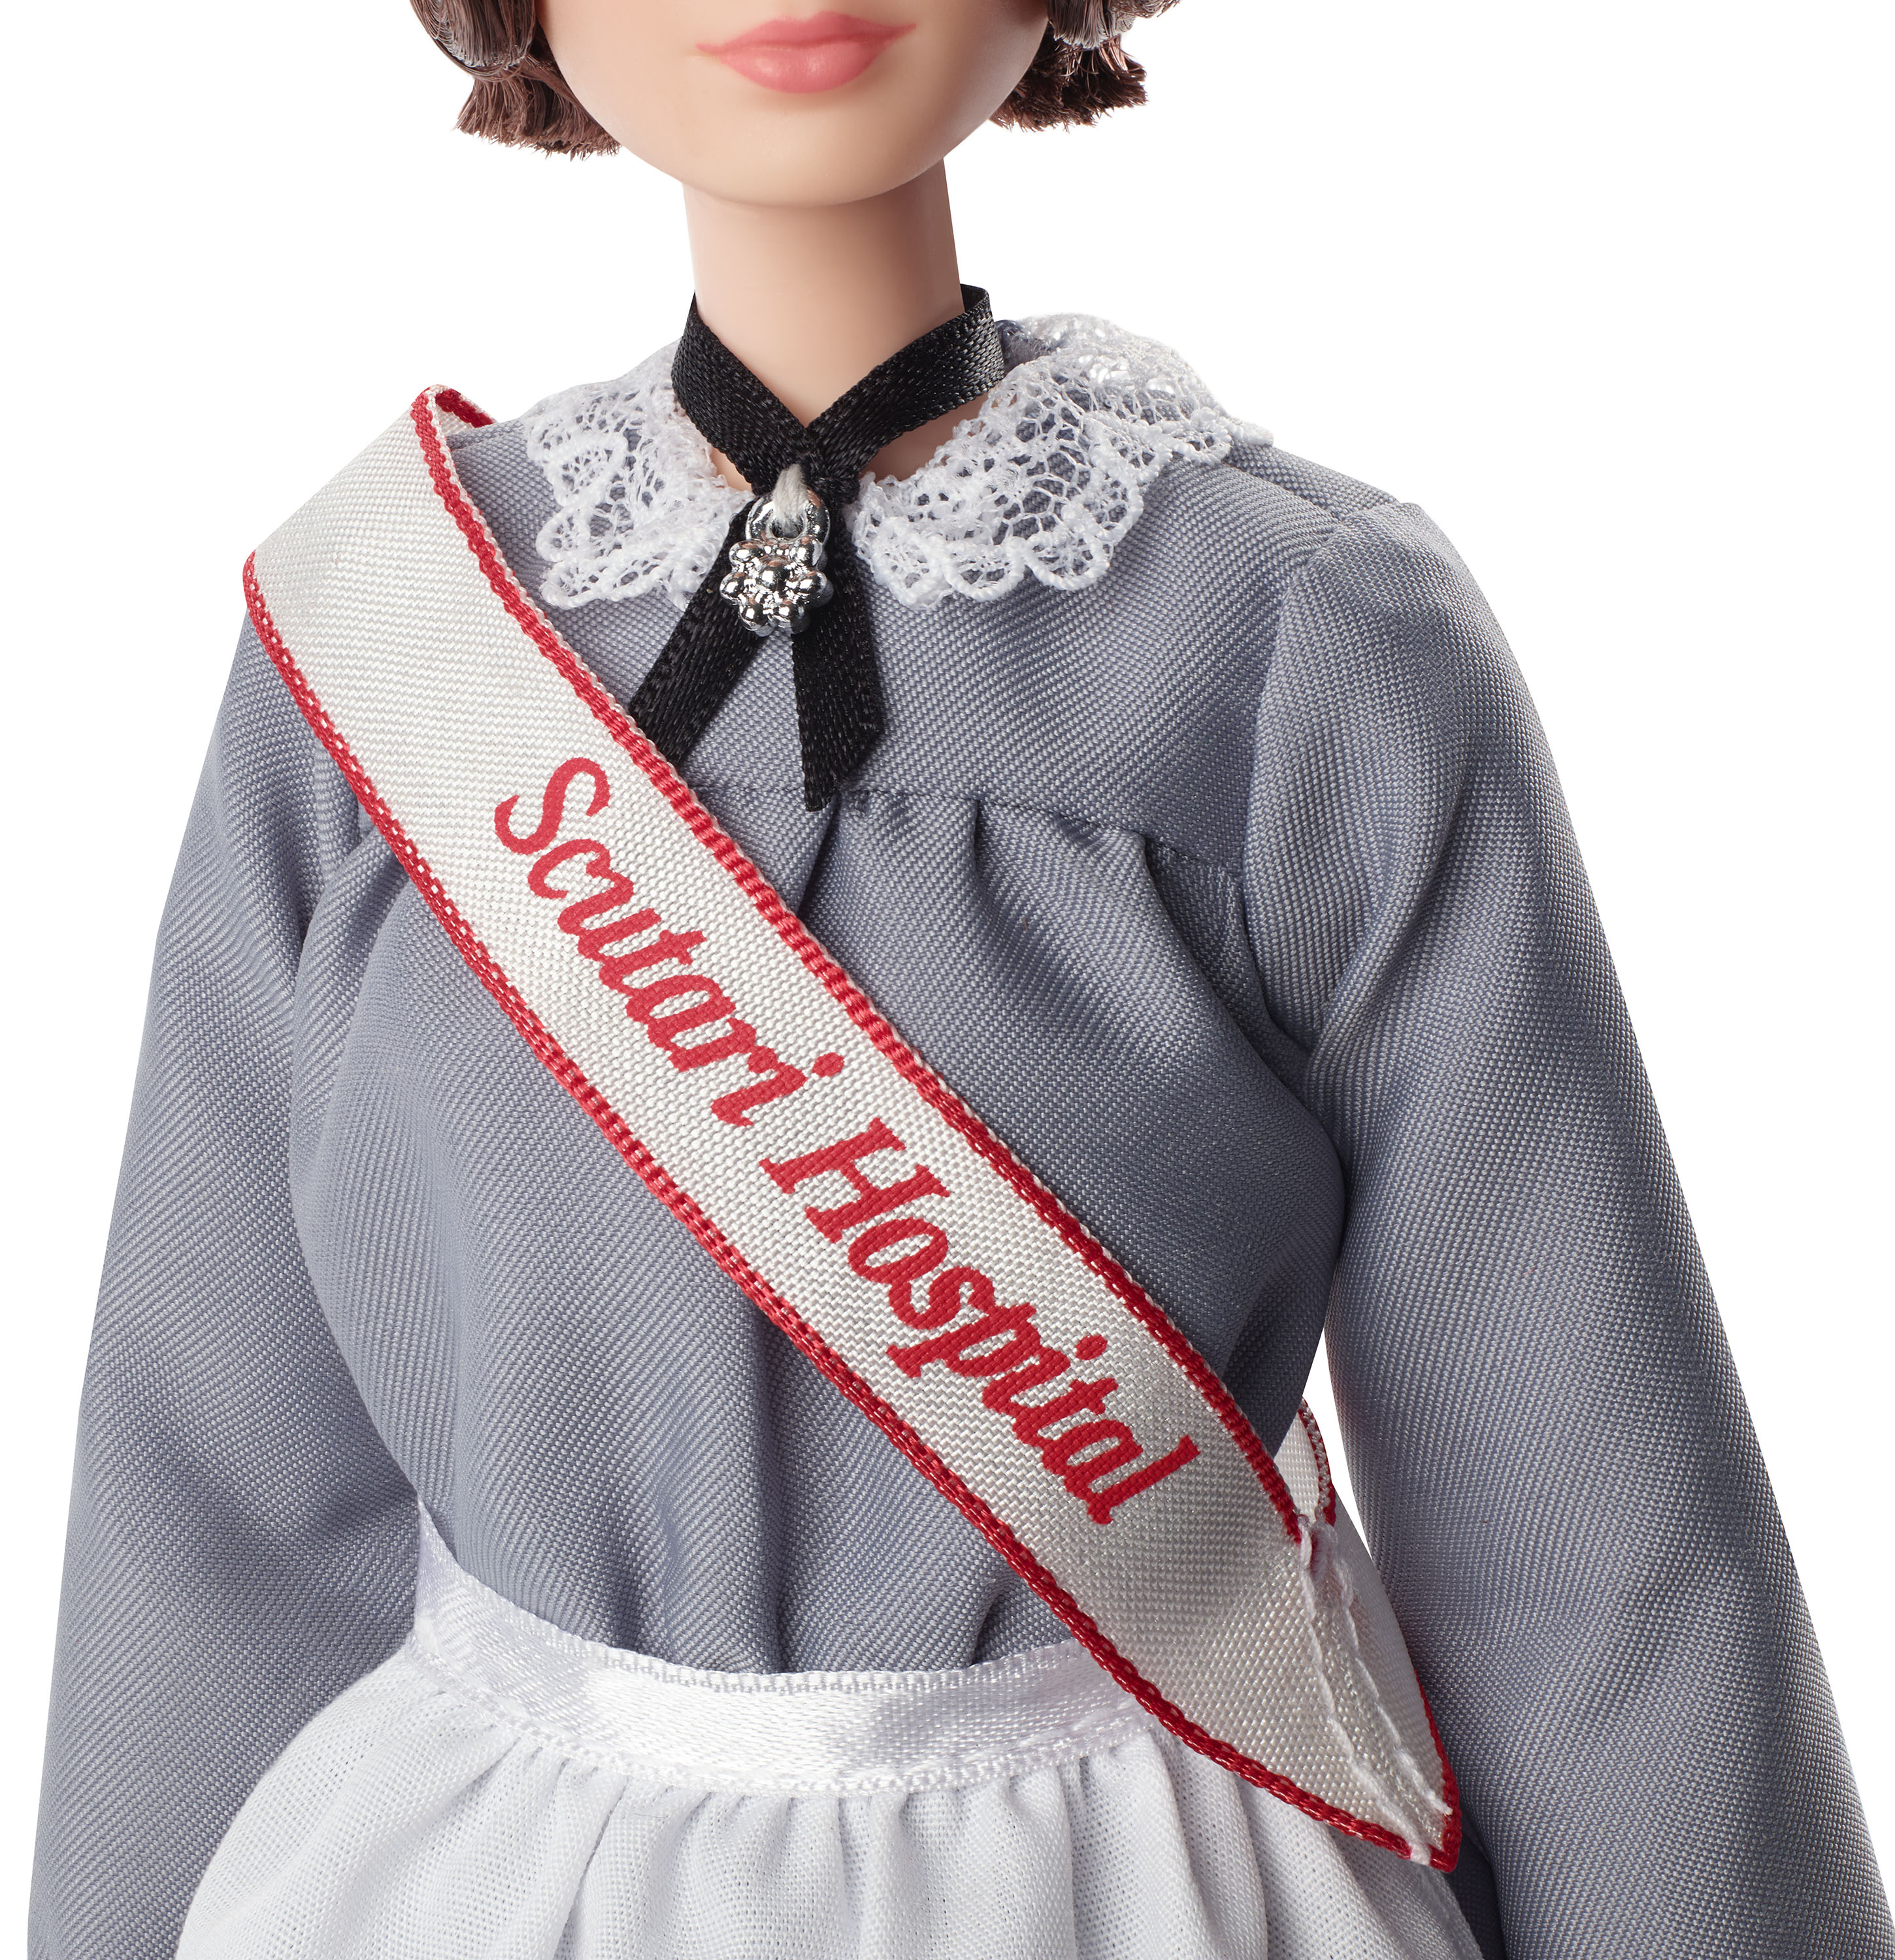 Barbie Inspiring Women Florence Nightingale Collectible Doll, Approx. 12 inch - image 5 of 7